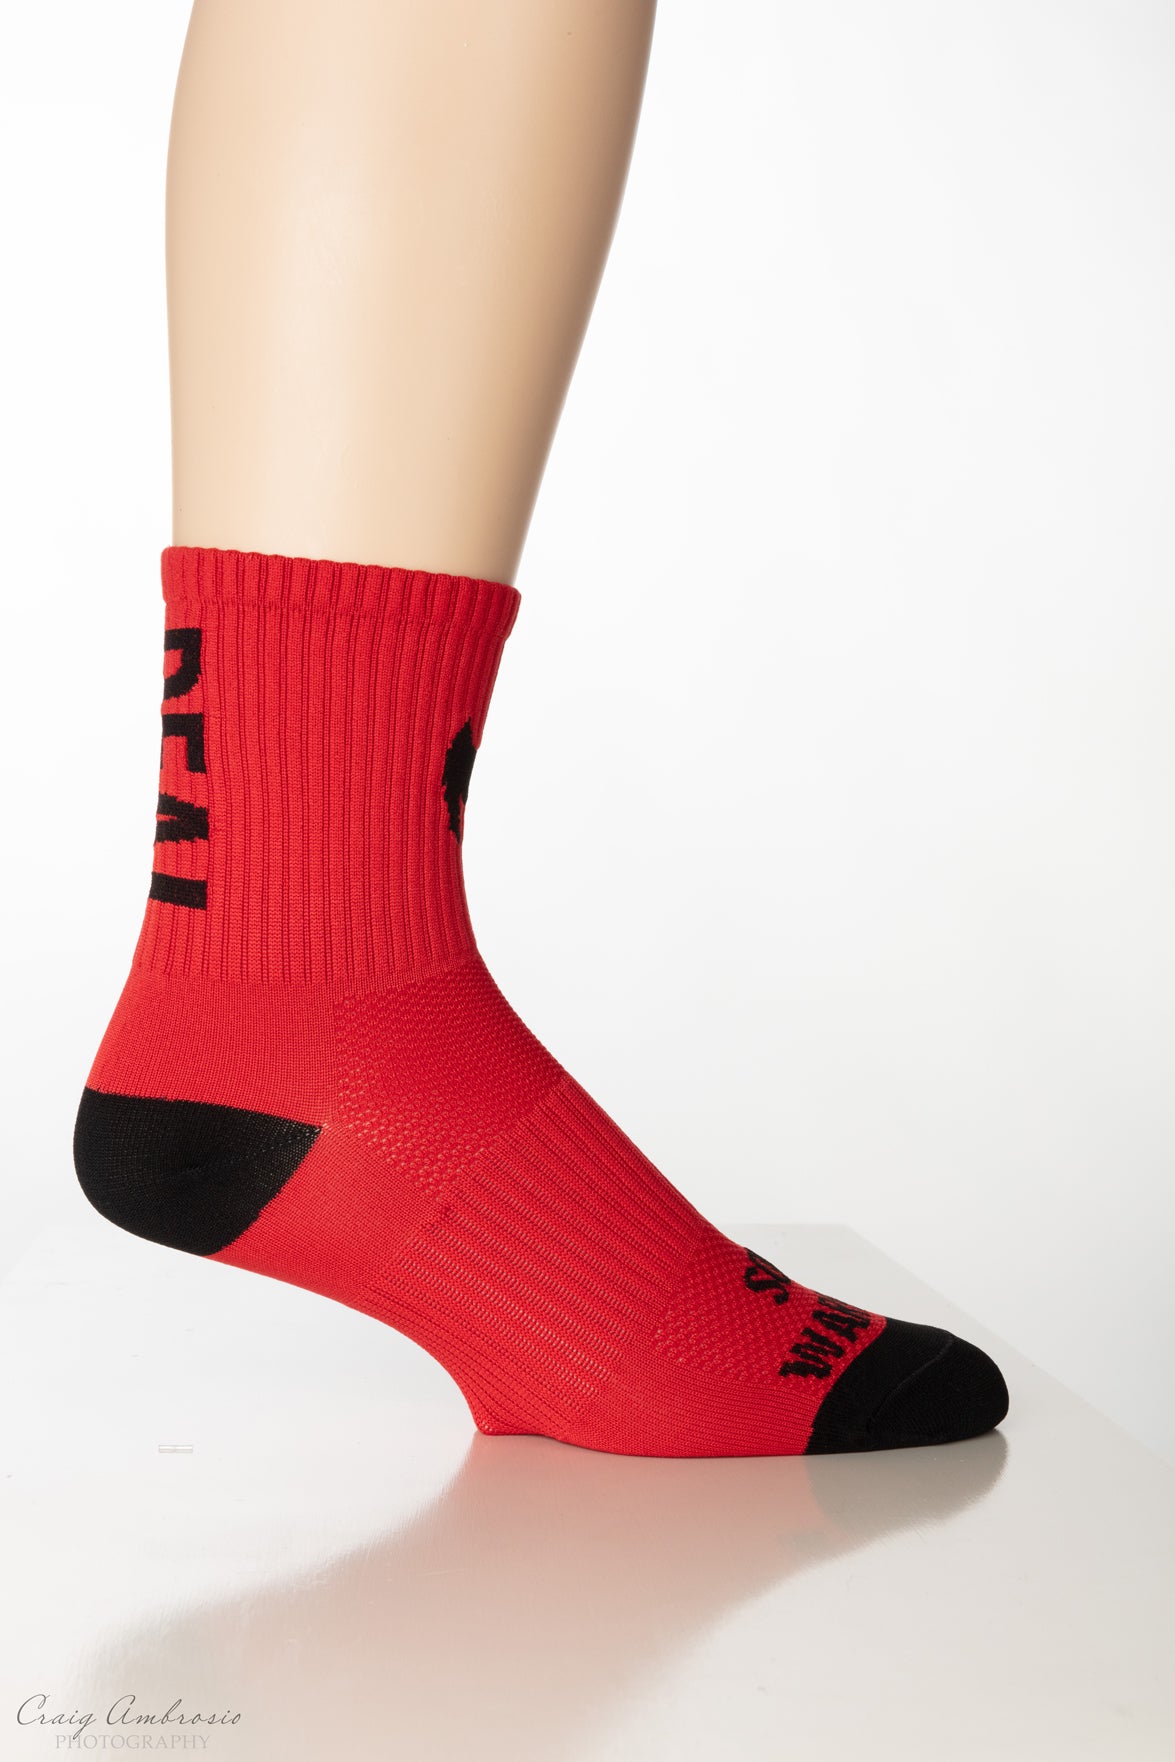 WARRIOR REAL DEAL Men’s and Women’s Compression Cycling Socks